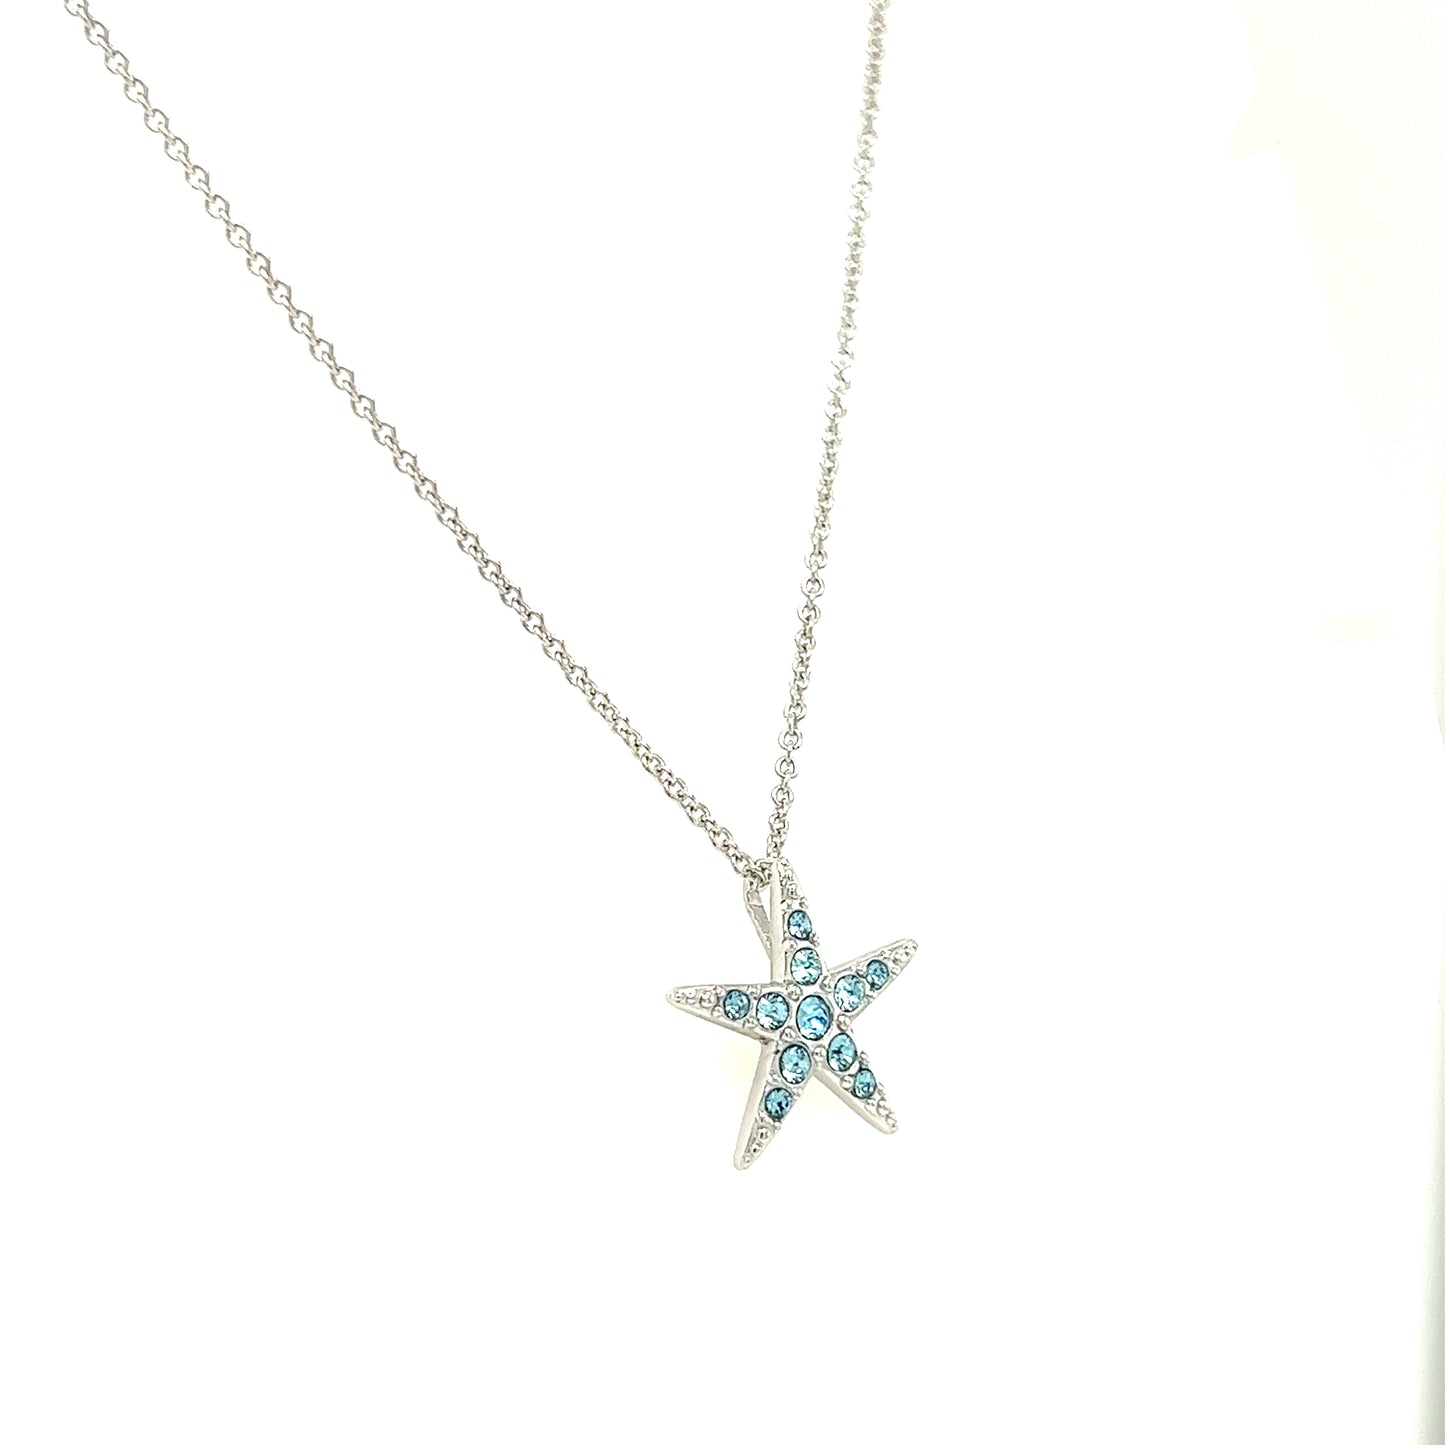 Starfish Necklace with Aqua Crystals in Sterling Silver Left Side View